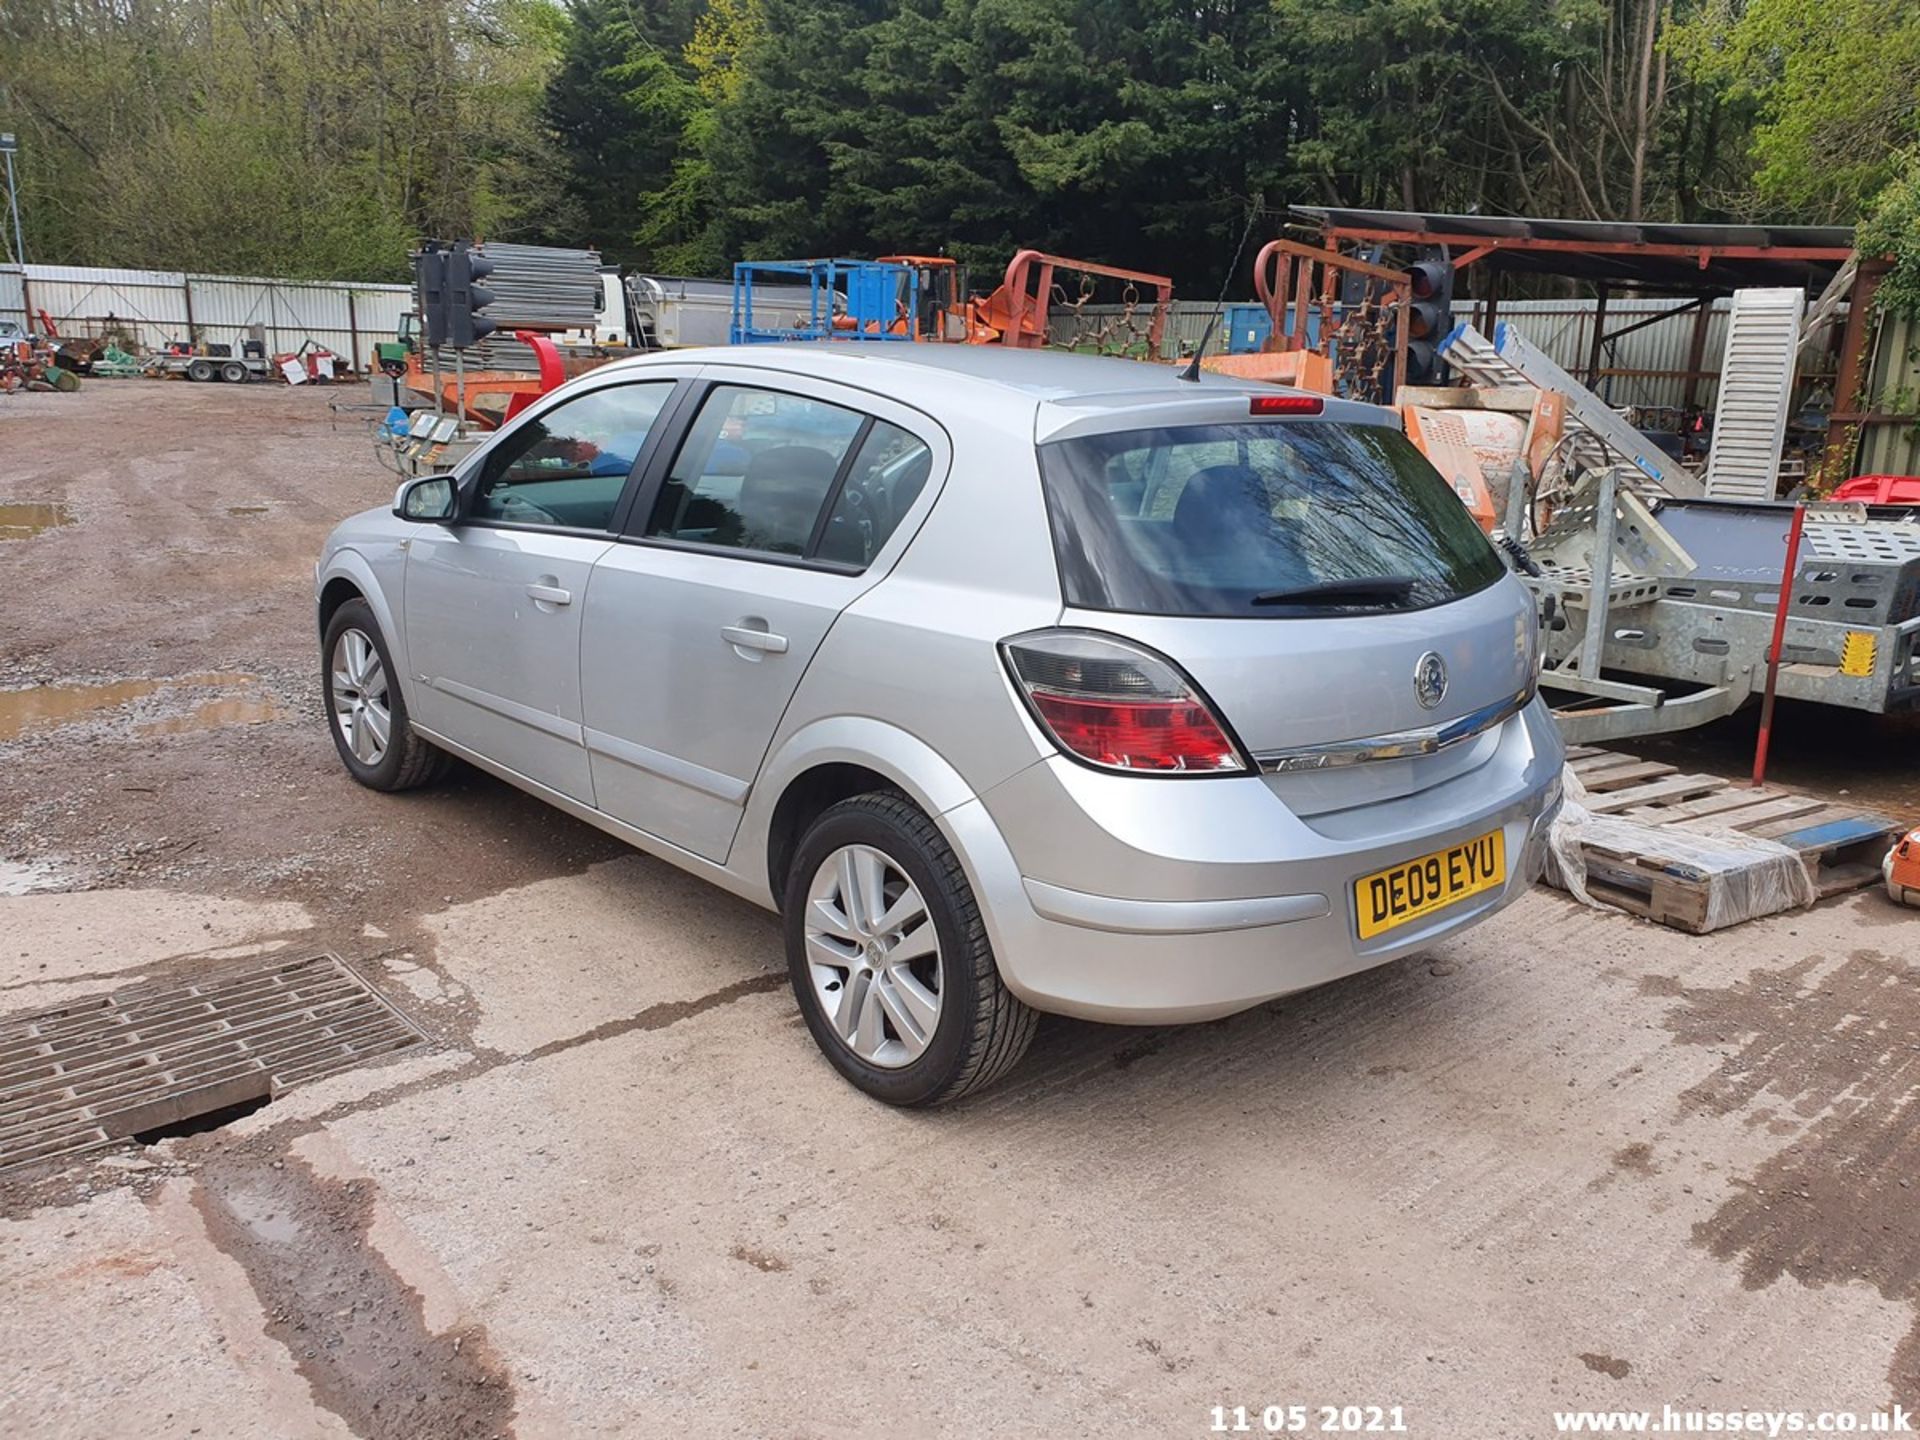 09/09 VAUXHALL ASTRA SXI TWINPORT - 1364cc 5dr Hatchback (Silver, 101k) - Image 13 of 13